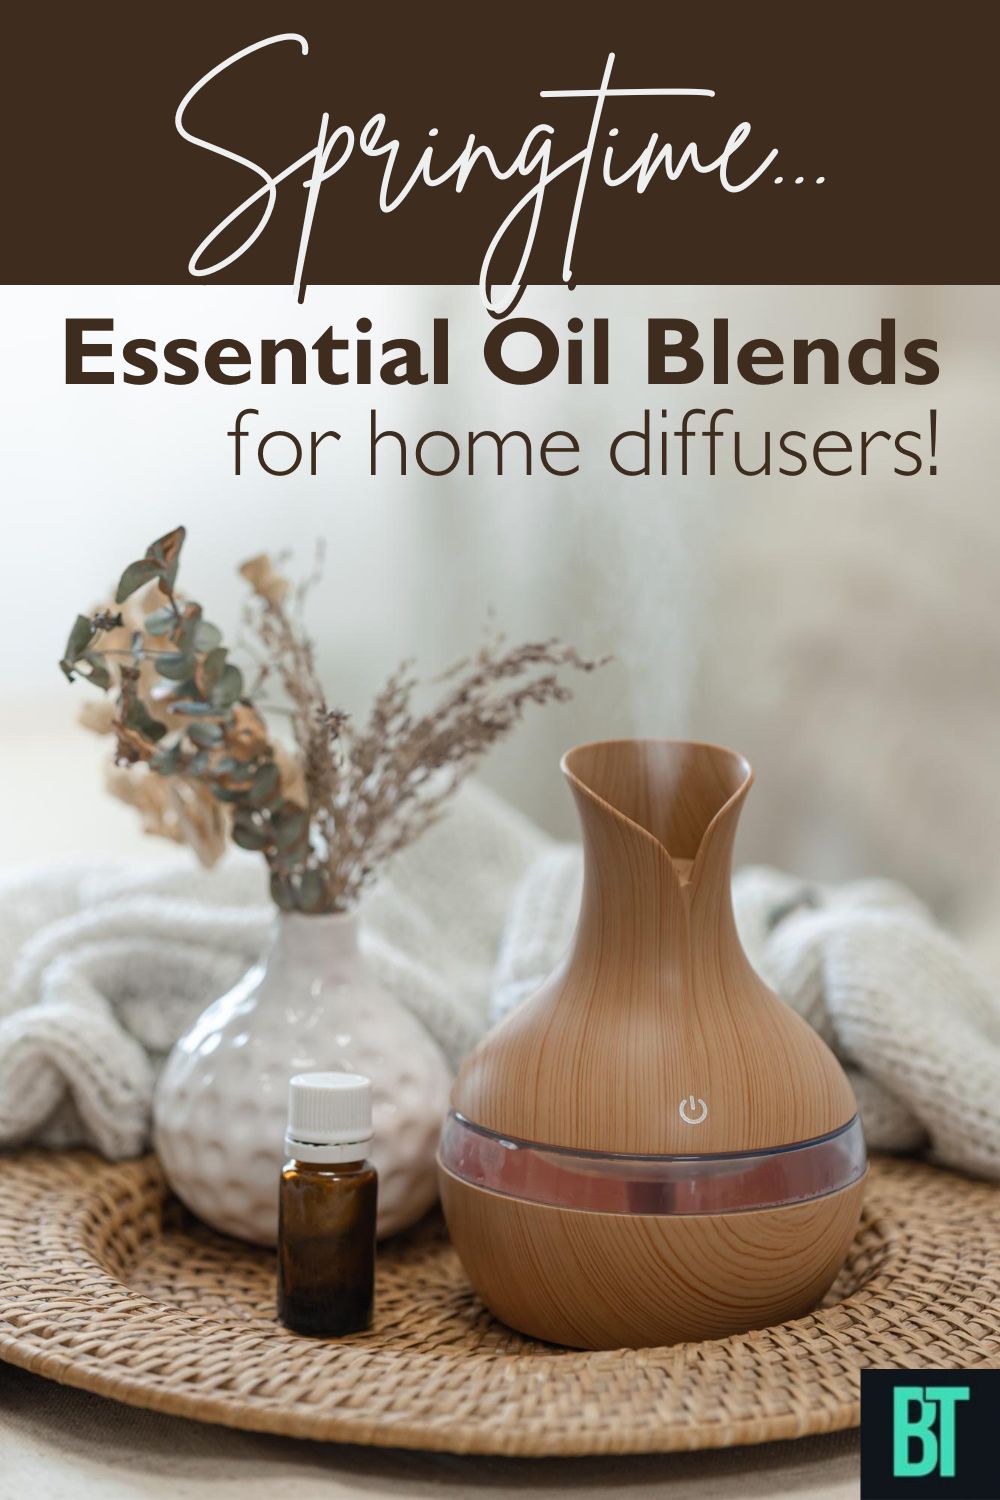 Springtime Essential Oil Blends for home diffusers